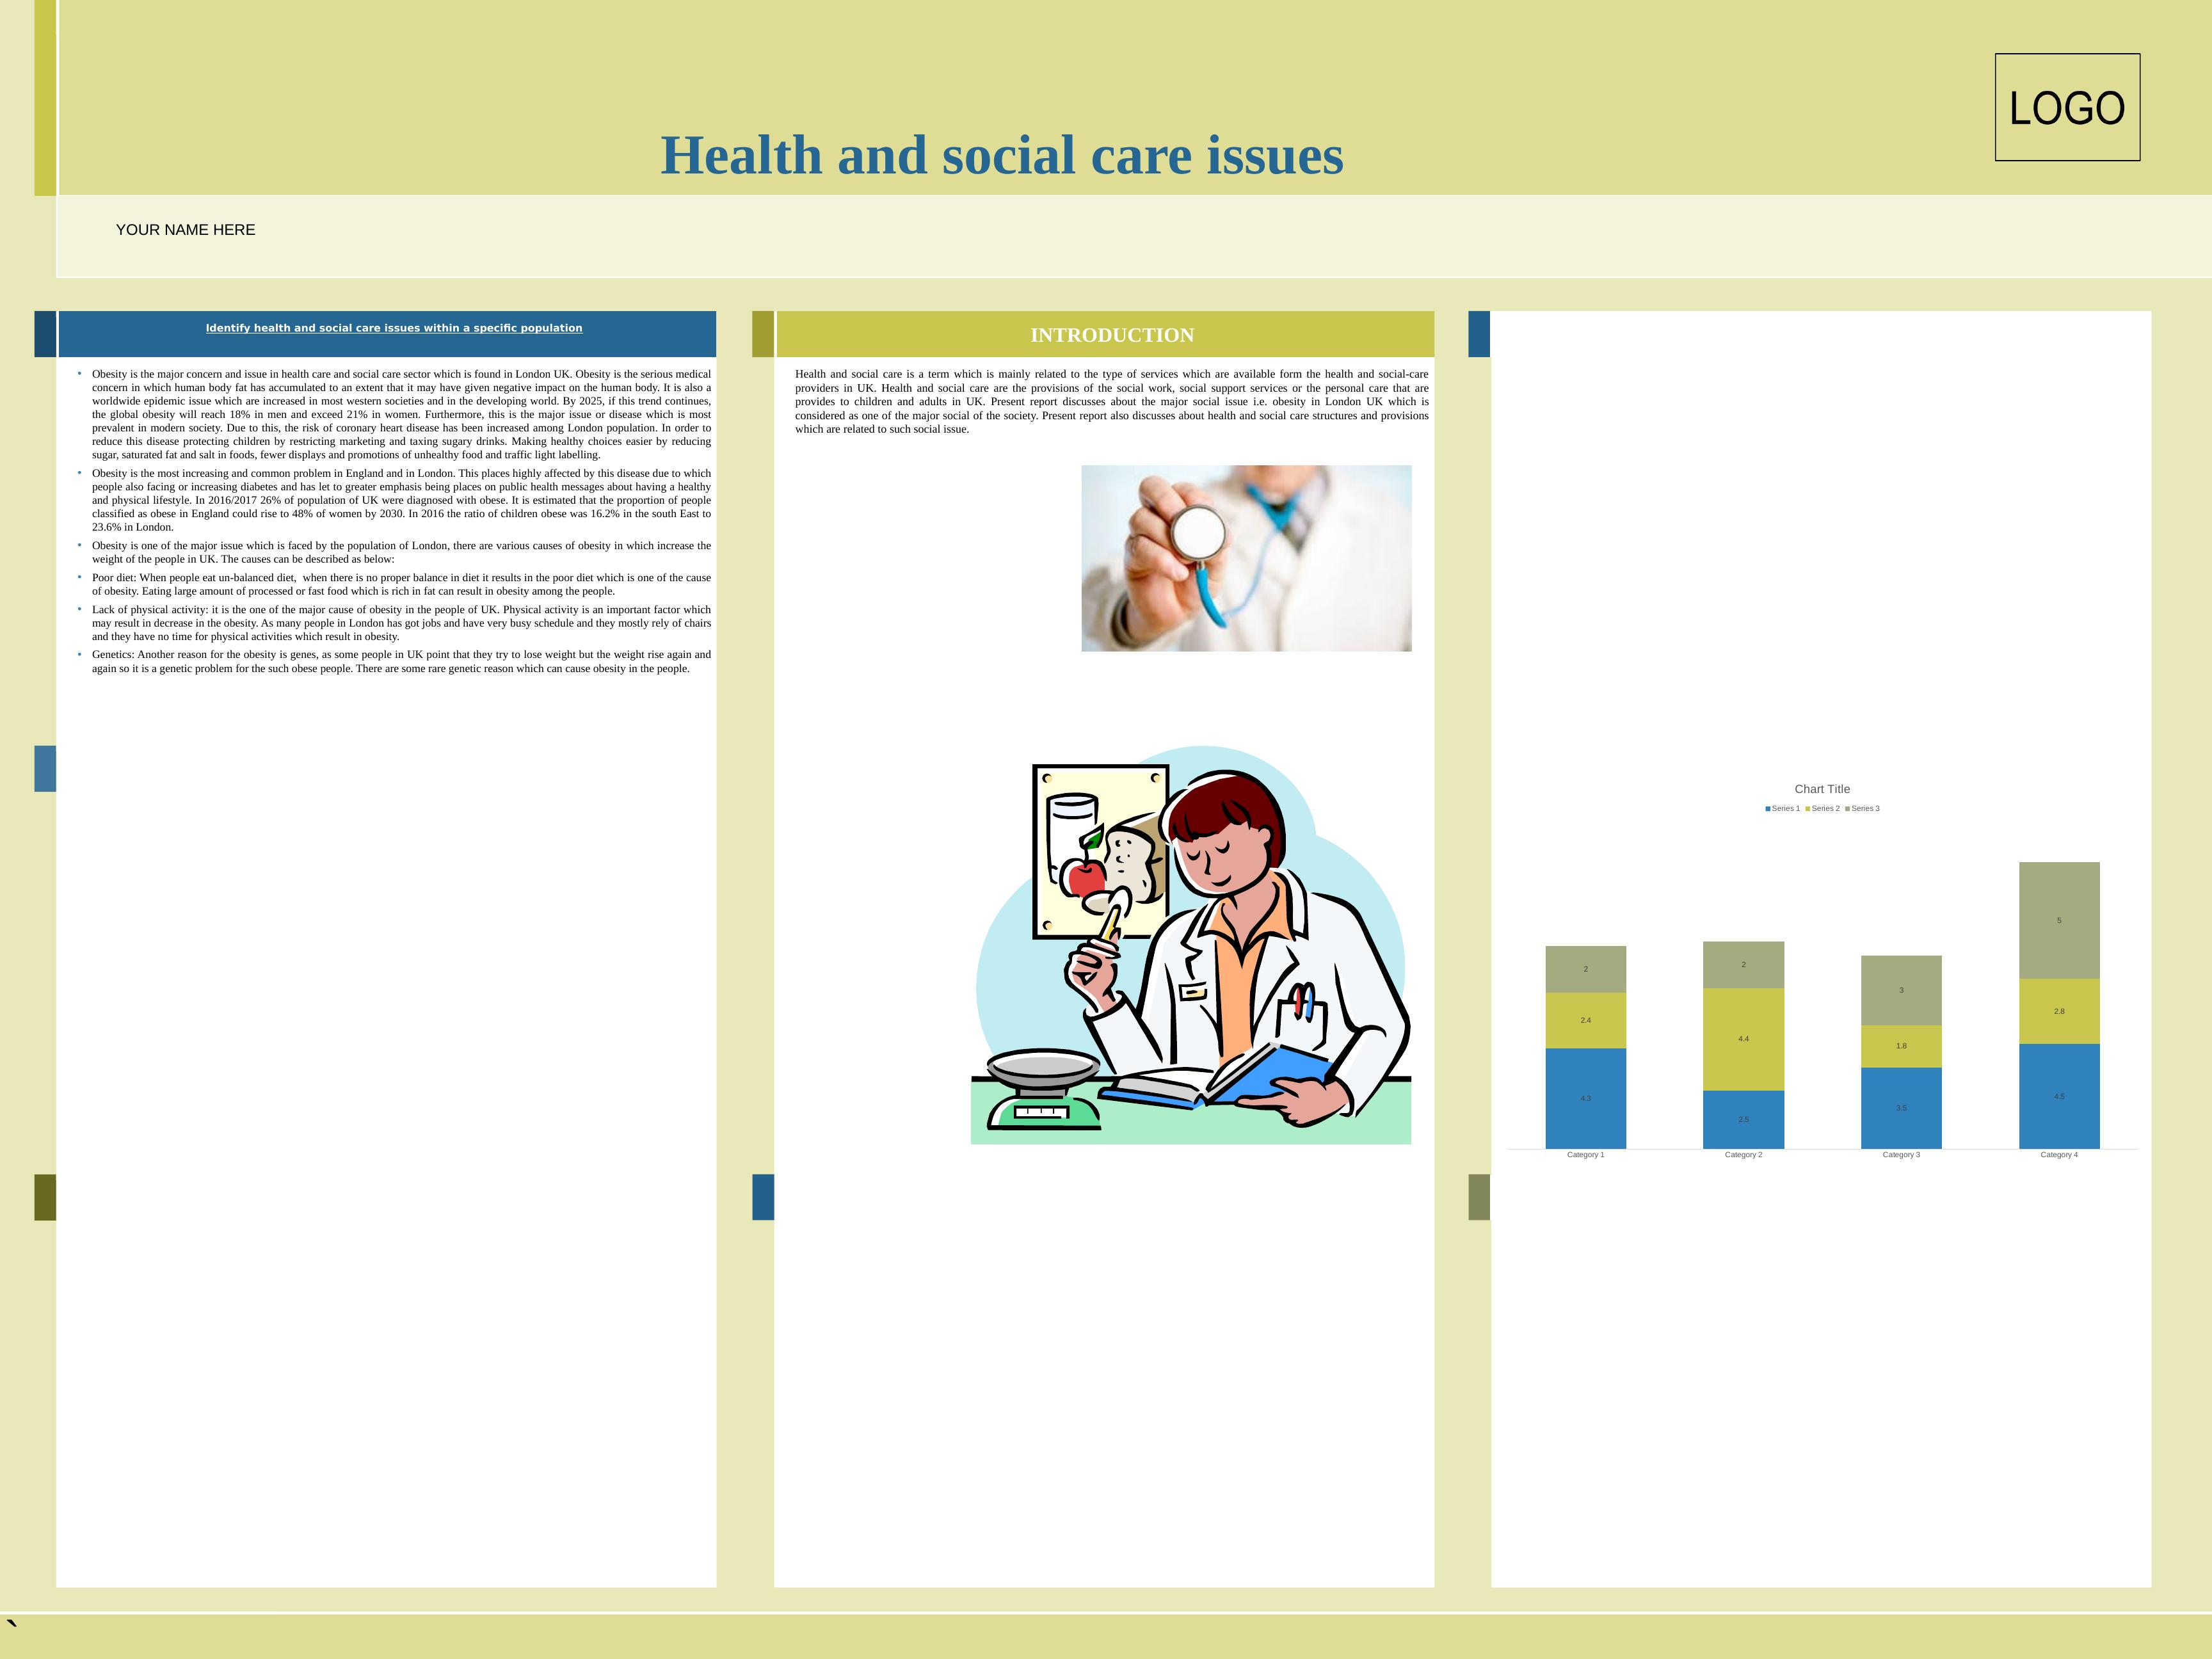 Health and Social Care Issues in London UK_1